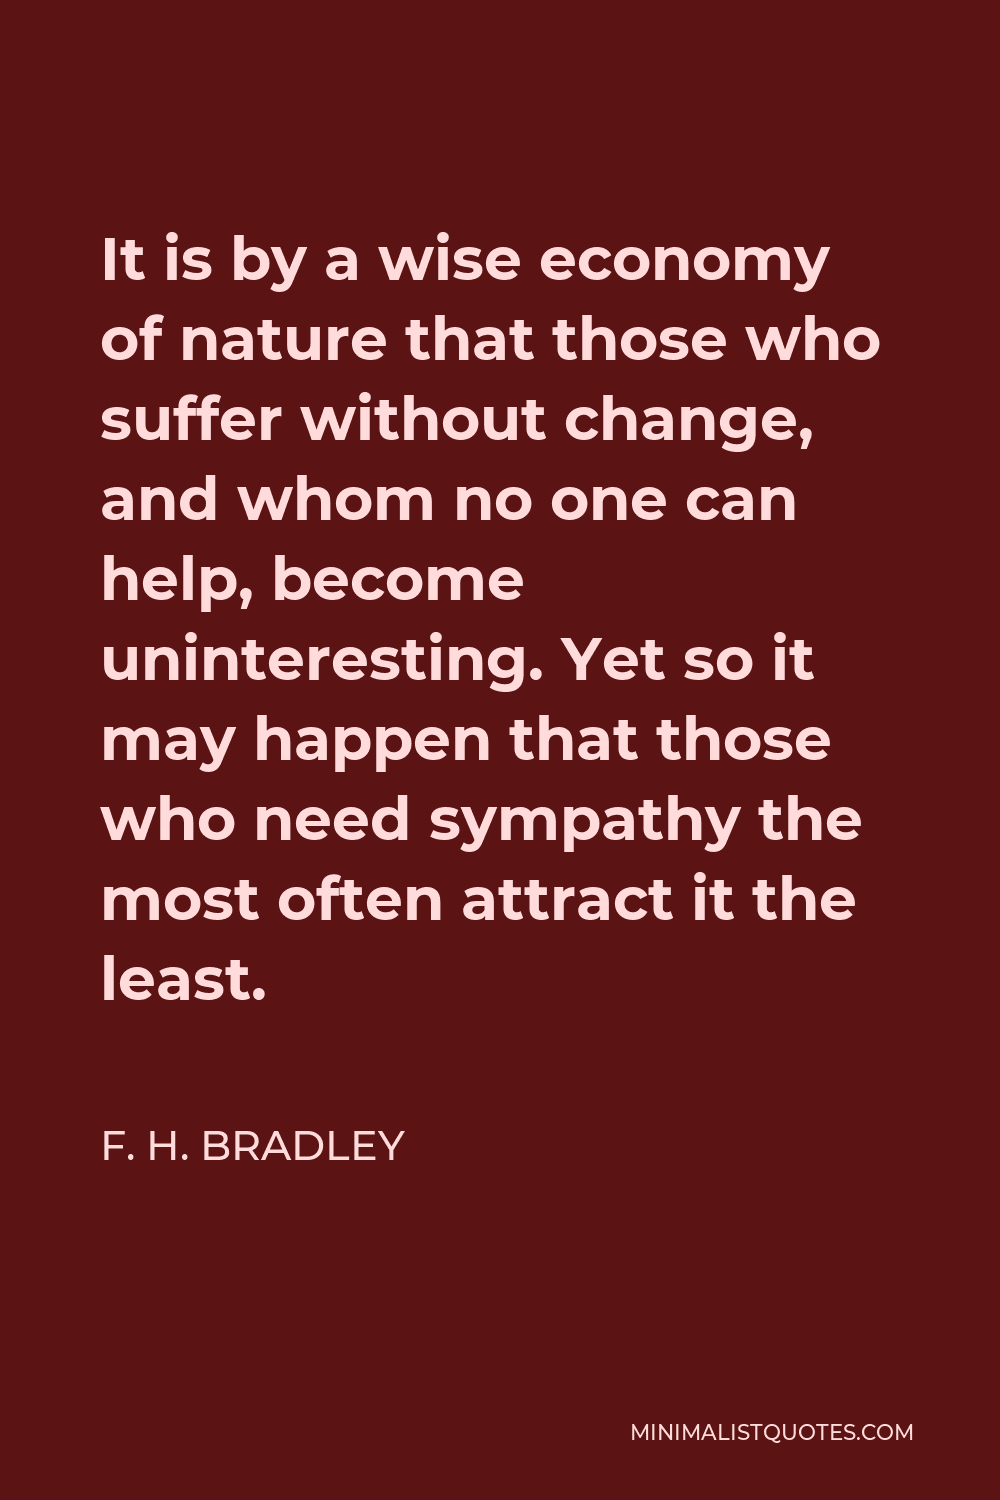 F. H. Bradley Quote - It is by a wise economy of nature that those who suffer without change, and whom no one can help, become uninteresting. Yet so it may happen that those who need sympathy the most often attract it the least.